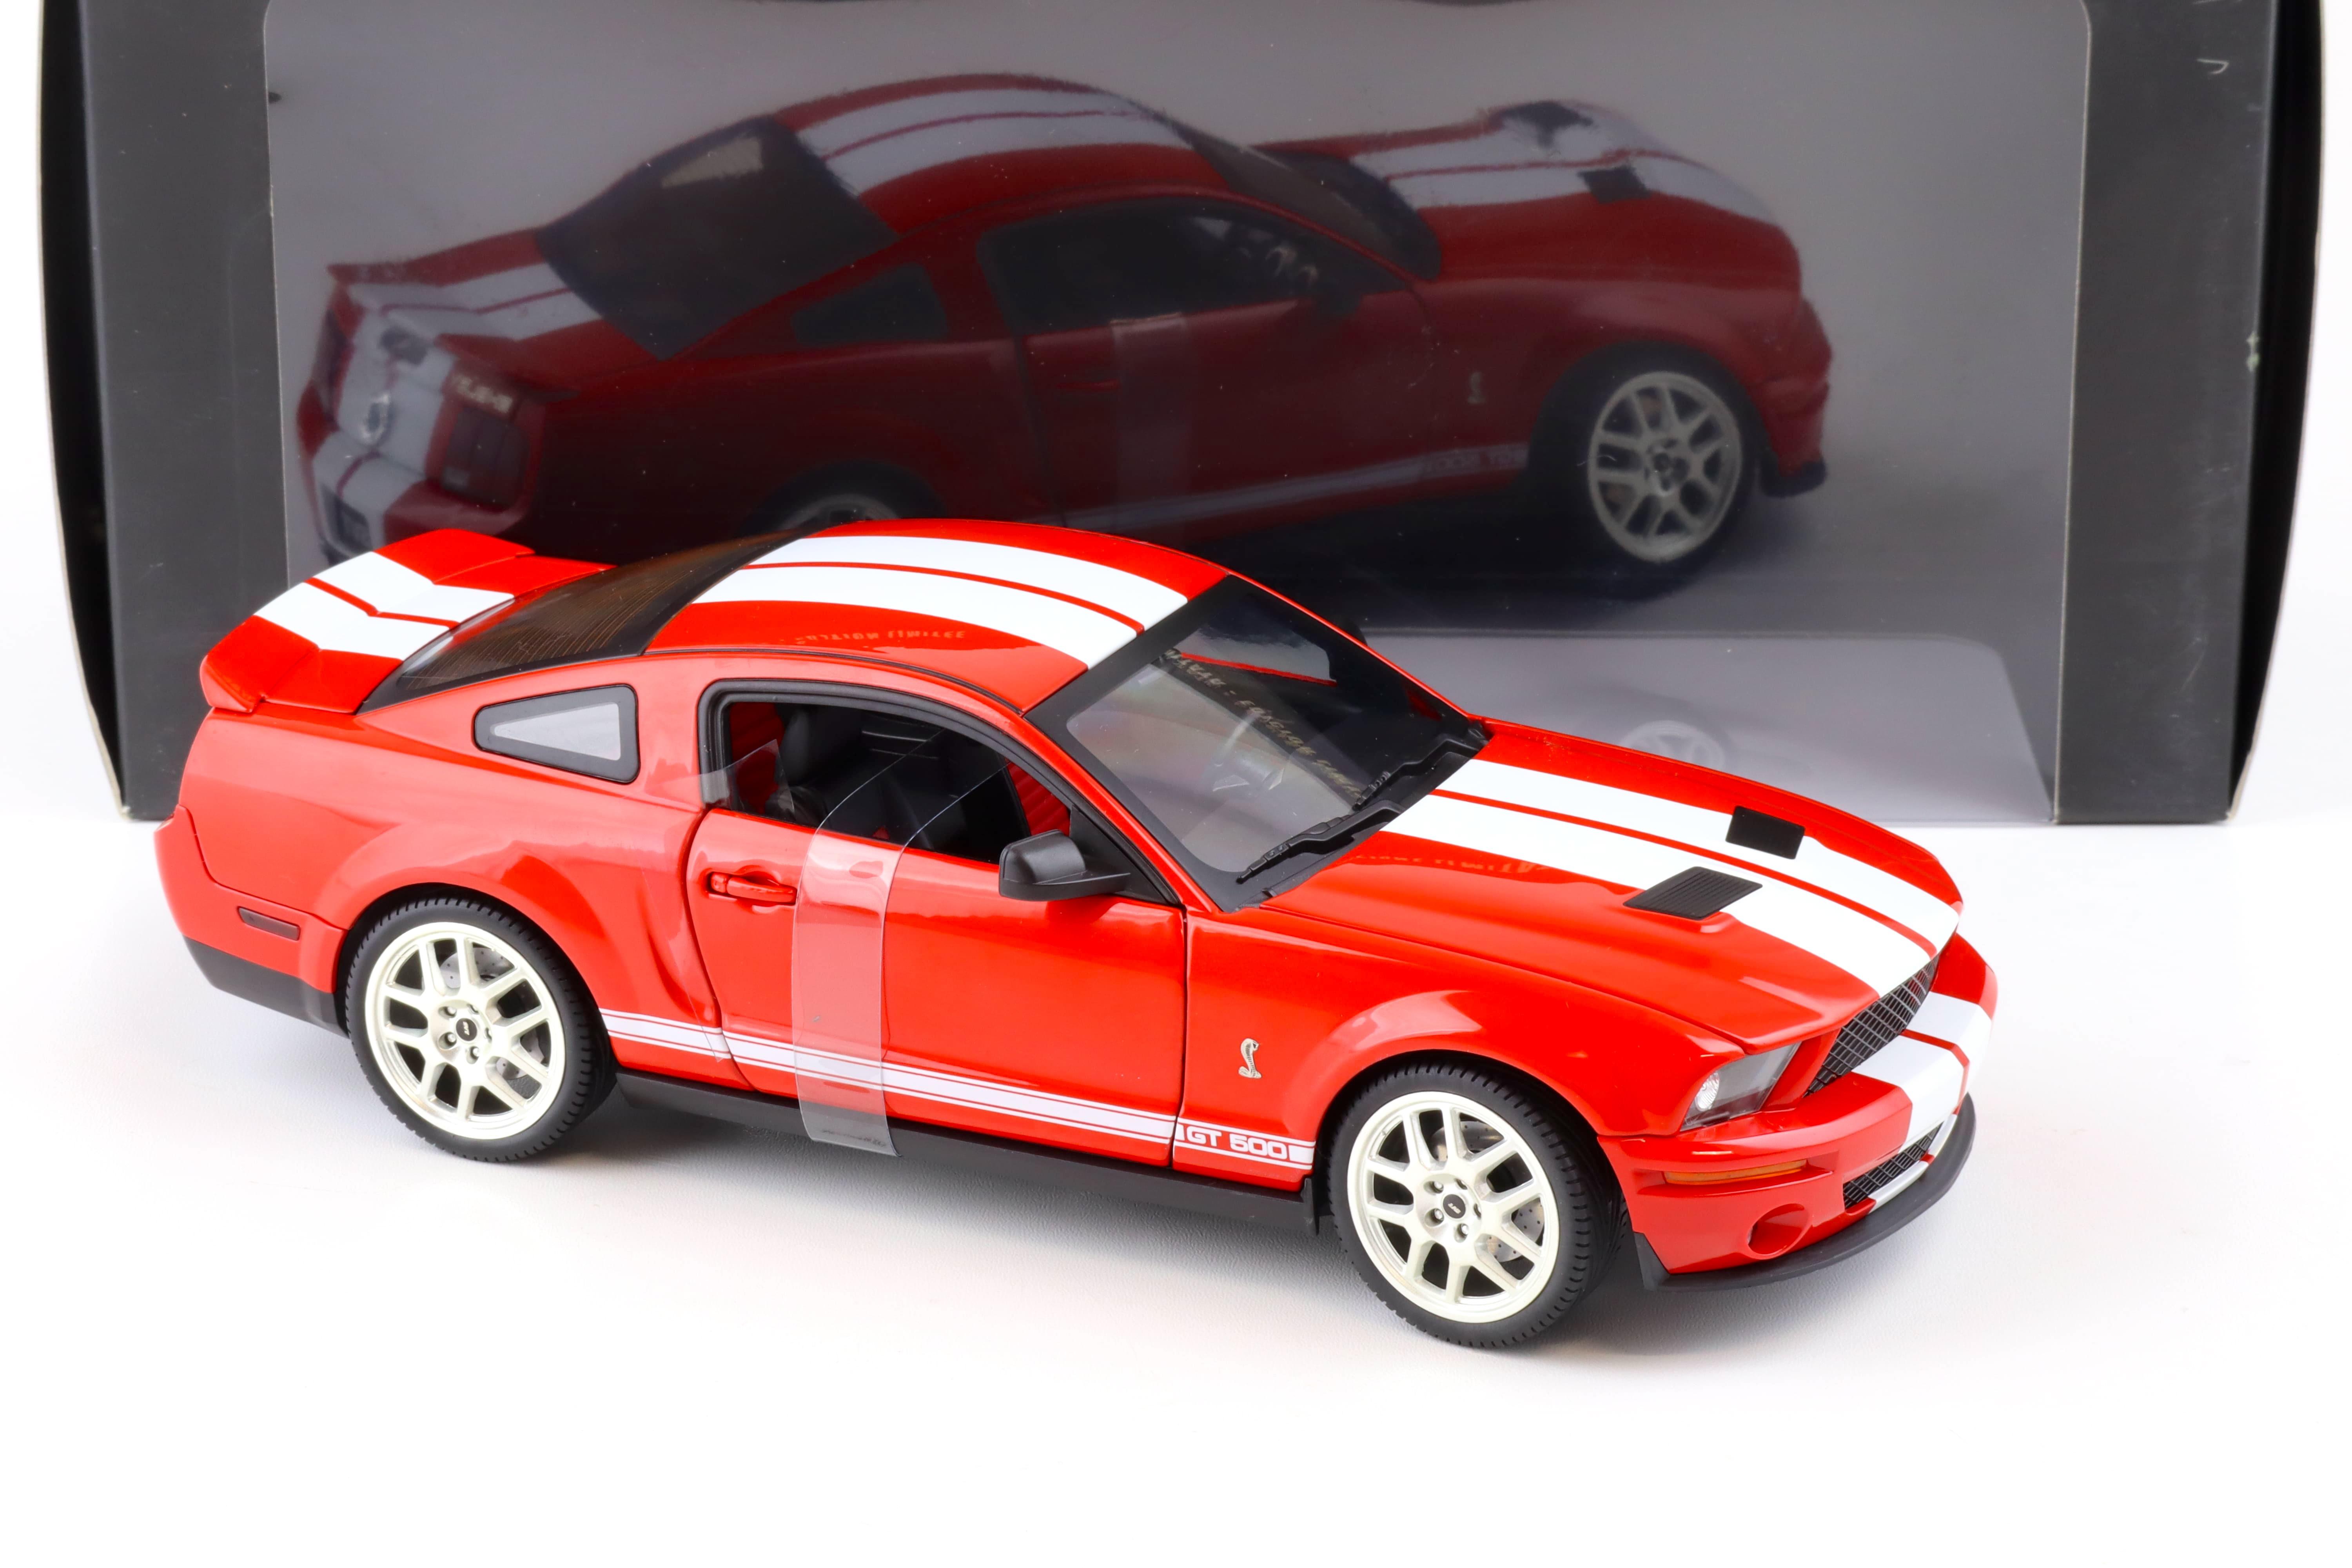 1:18 Hot Wheels Elite 2007 Shelby GT500 Coupe red/ white stripes